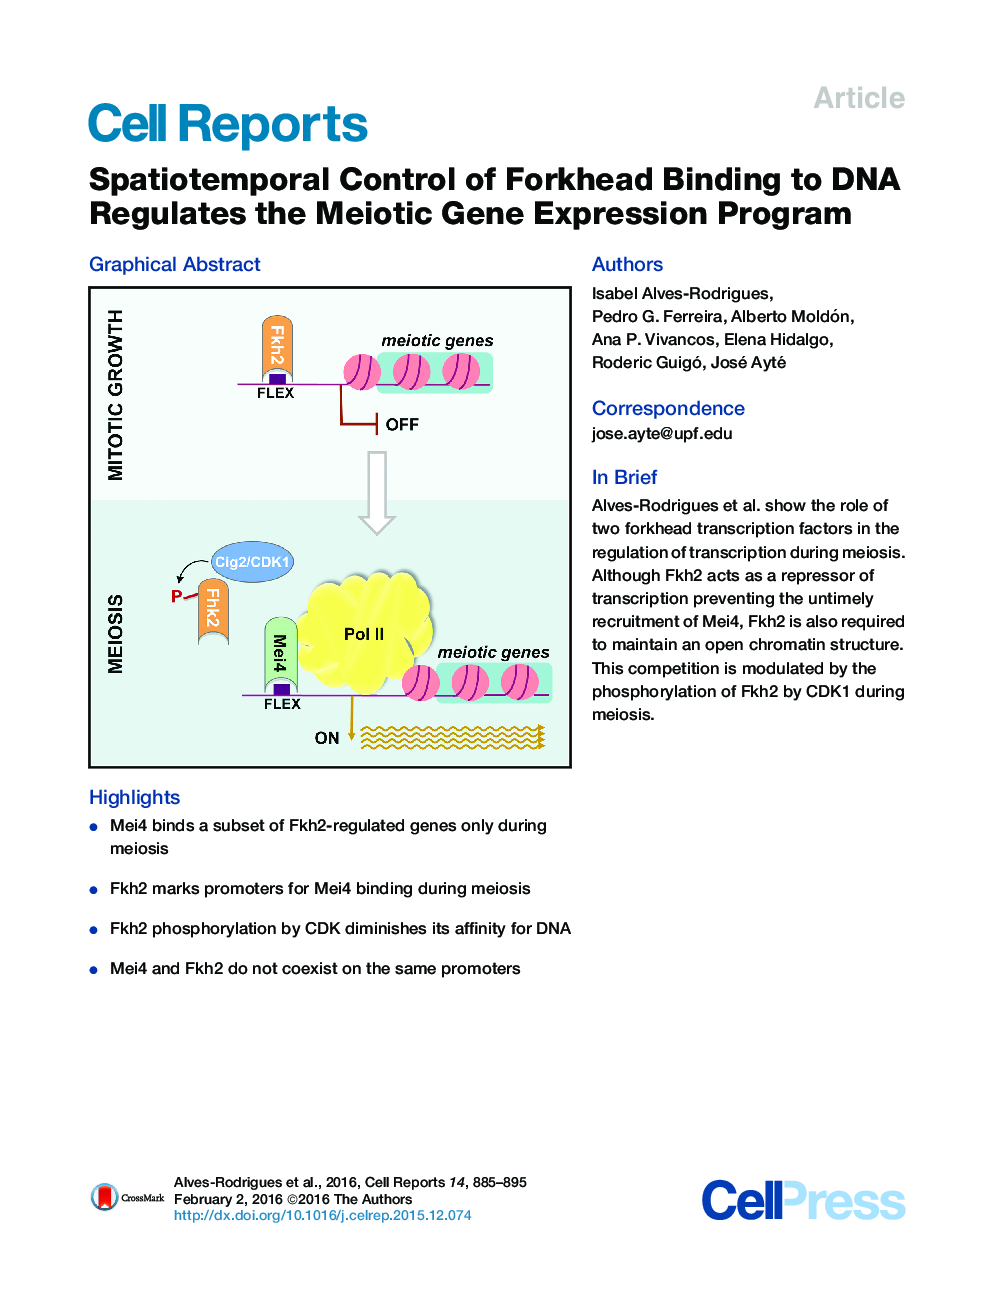 Spatiotemporal Control of Forkhead Binding to DNA Regulates the Meiotic Gene Expression Program 